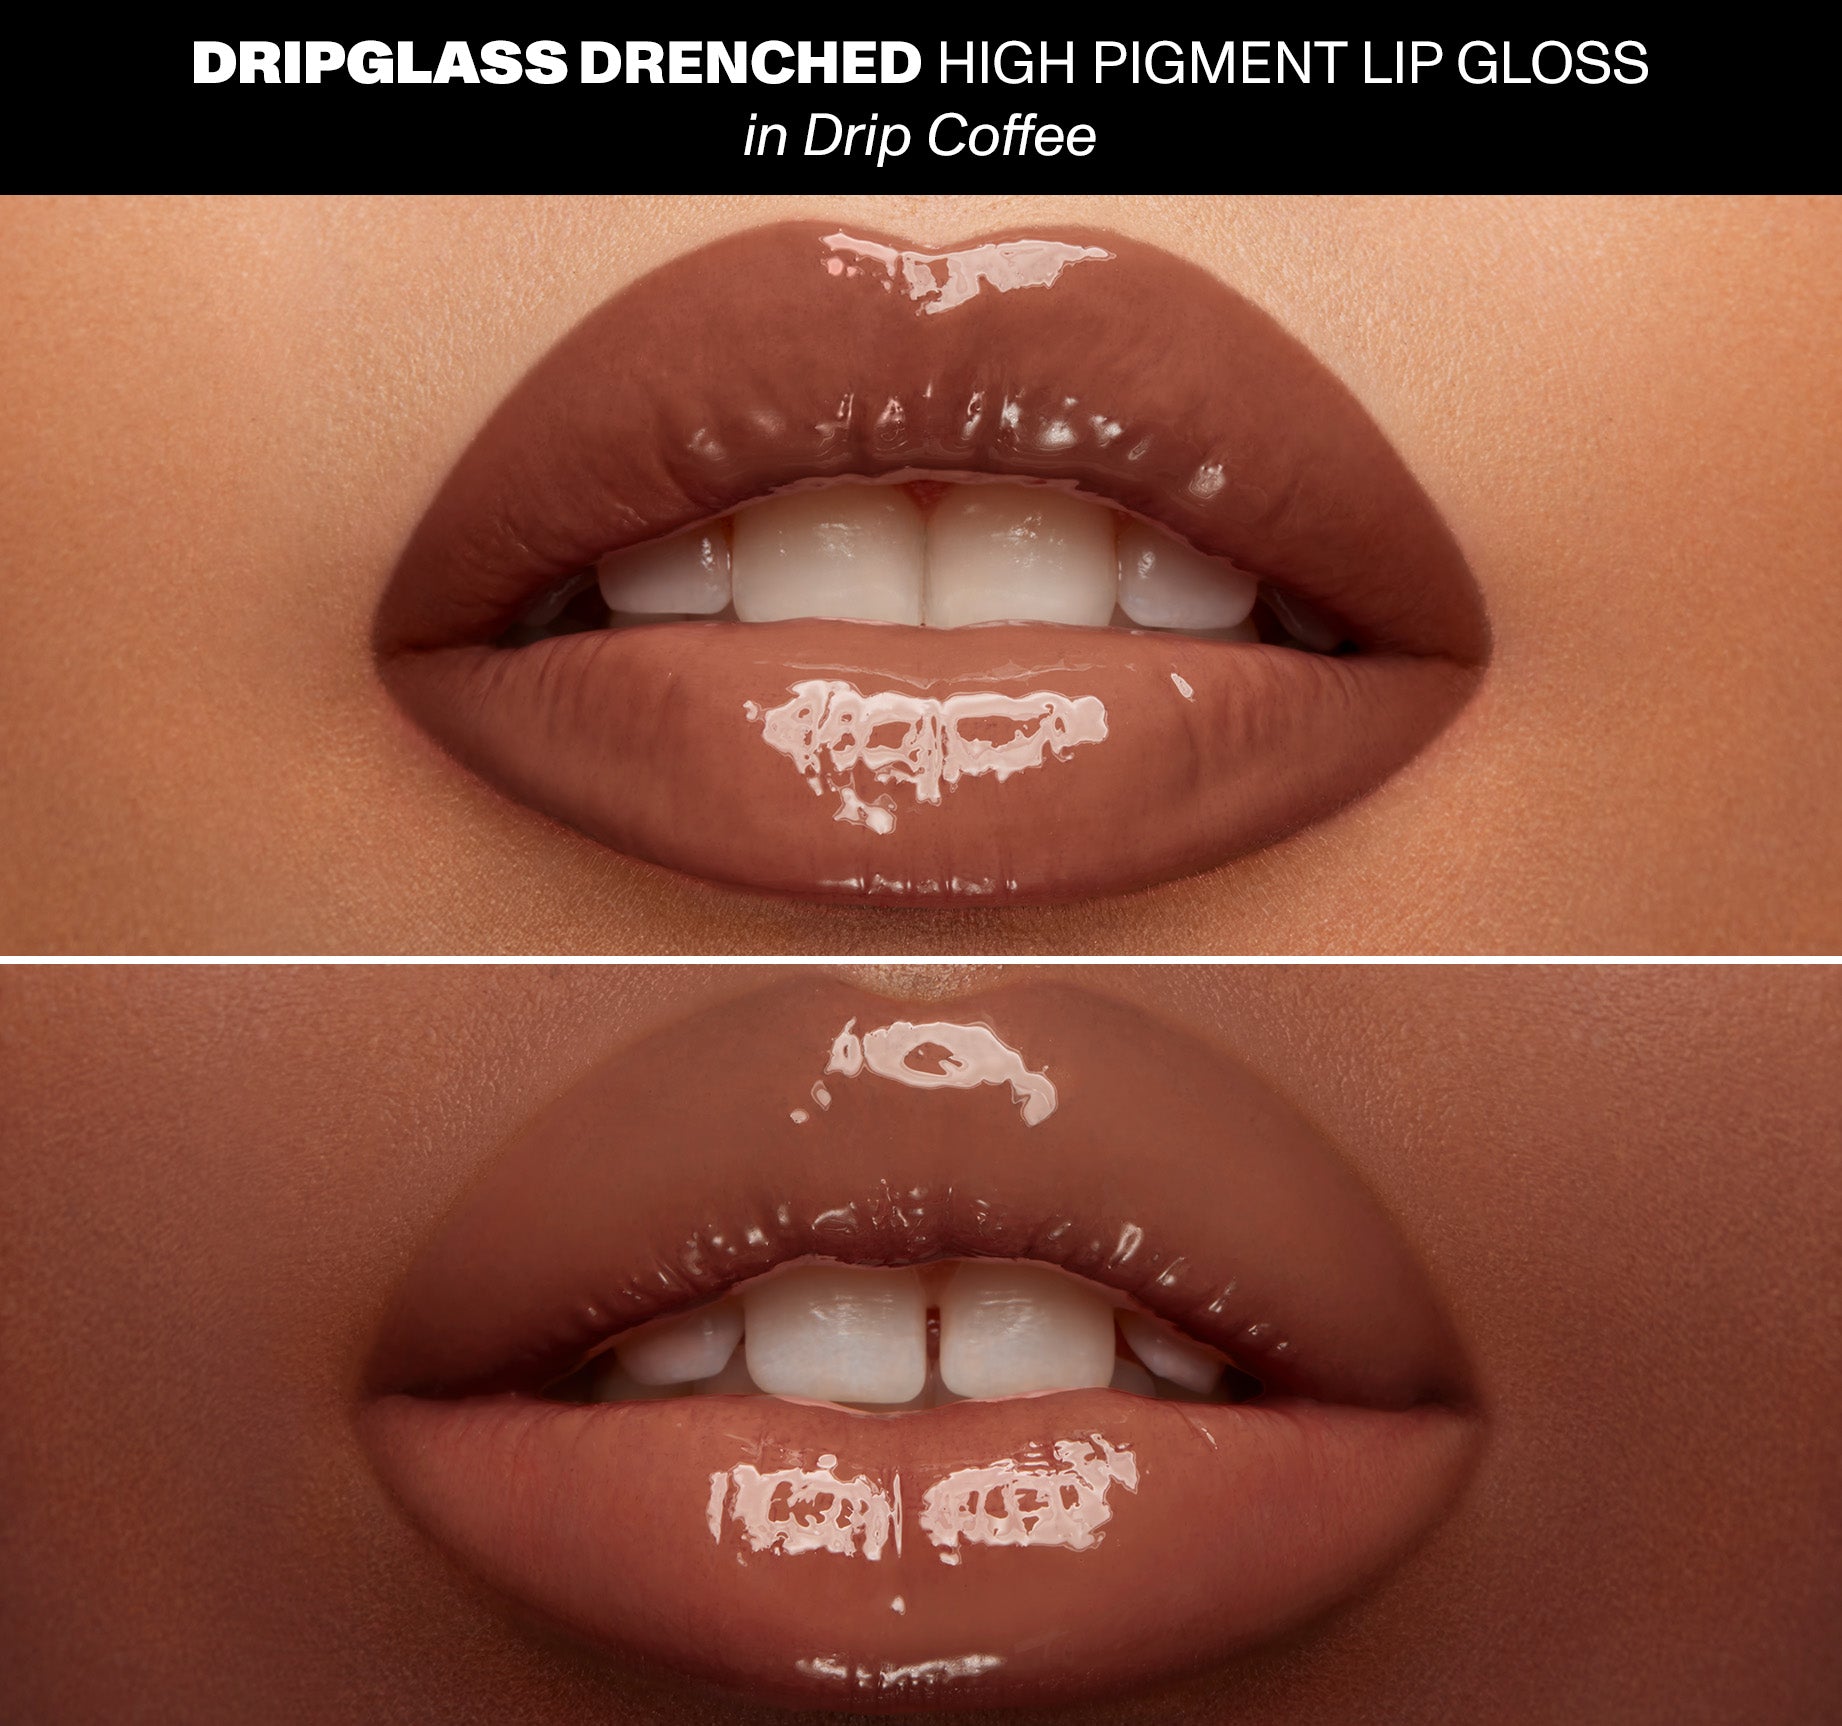 Dripglass Drenched High Pigment Lip Gloss - Drip Coffee - Image 4